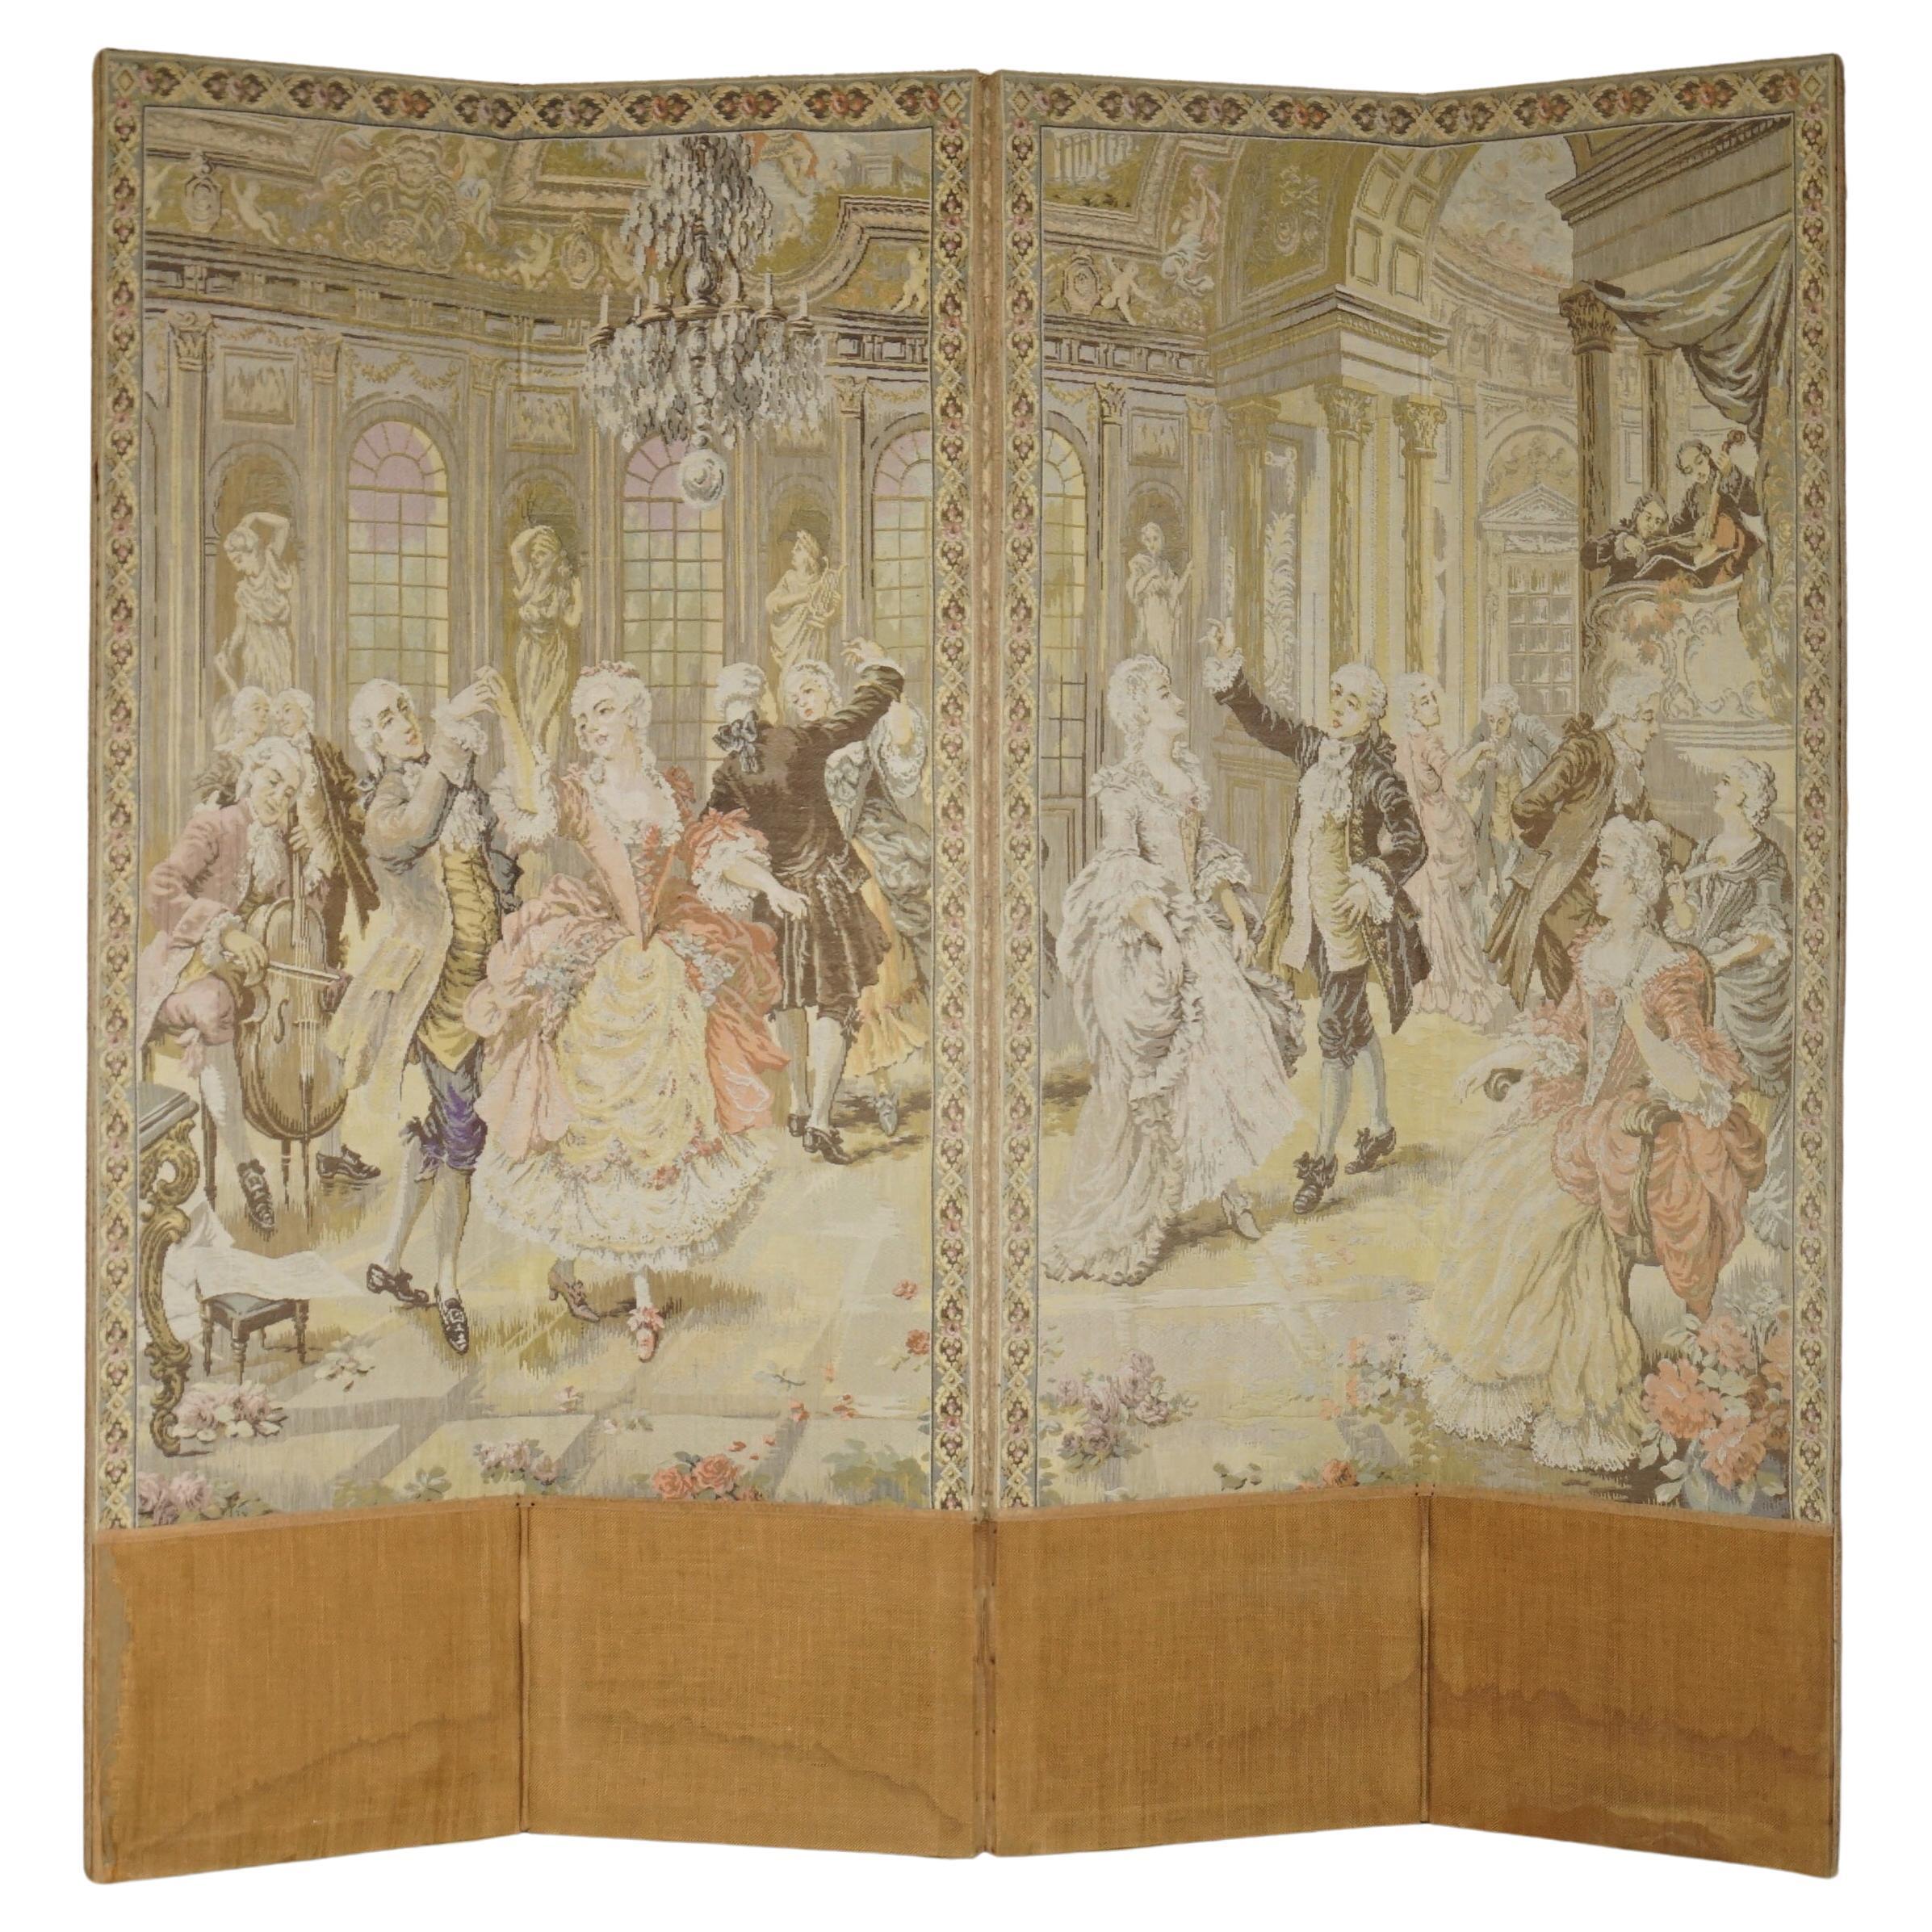 ORIGINAL TAPESTRY VICtoriaNANTIQUE FOUR PANEL FOLDING SCREEN OF NOBLES DANCING